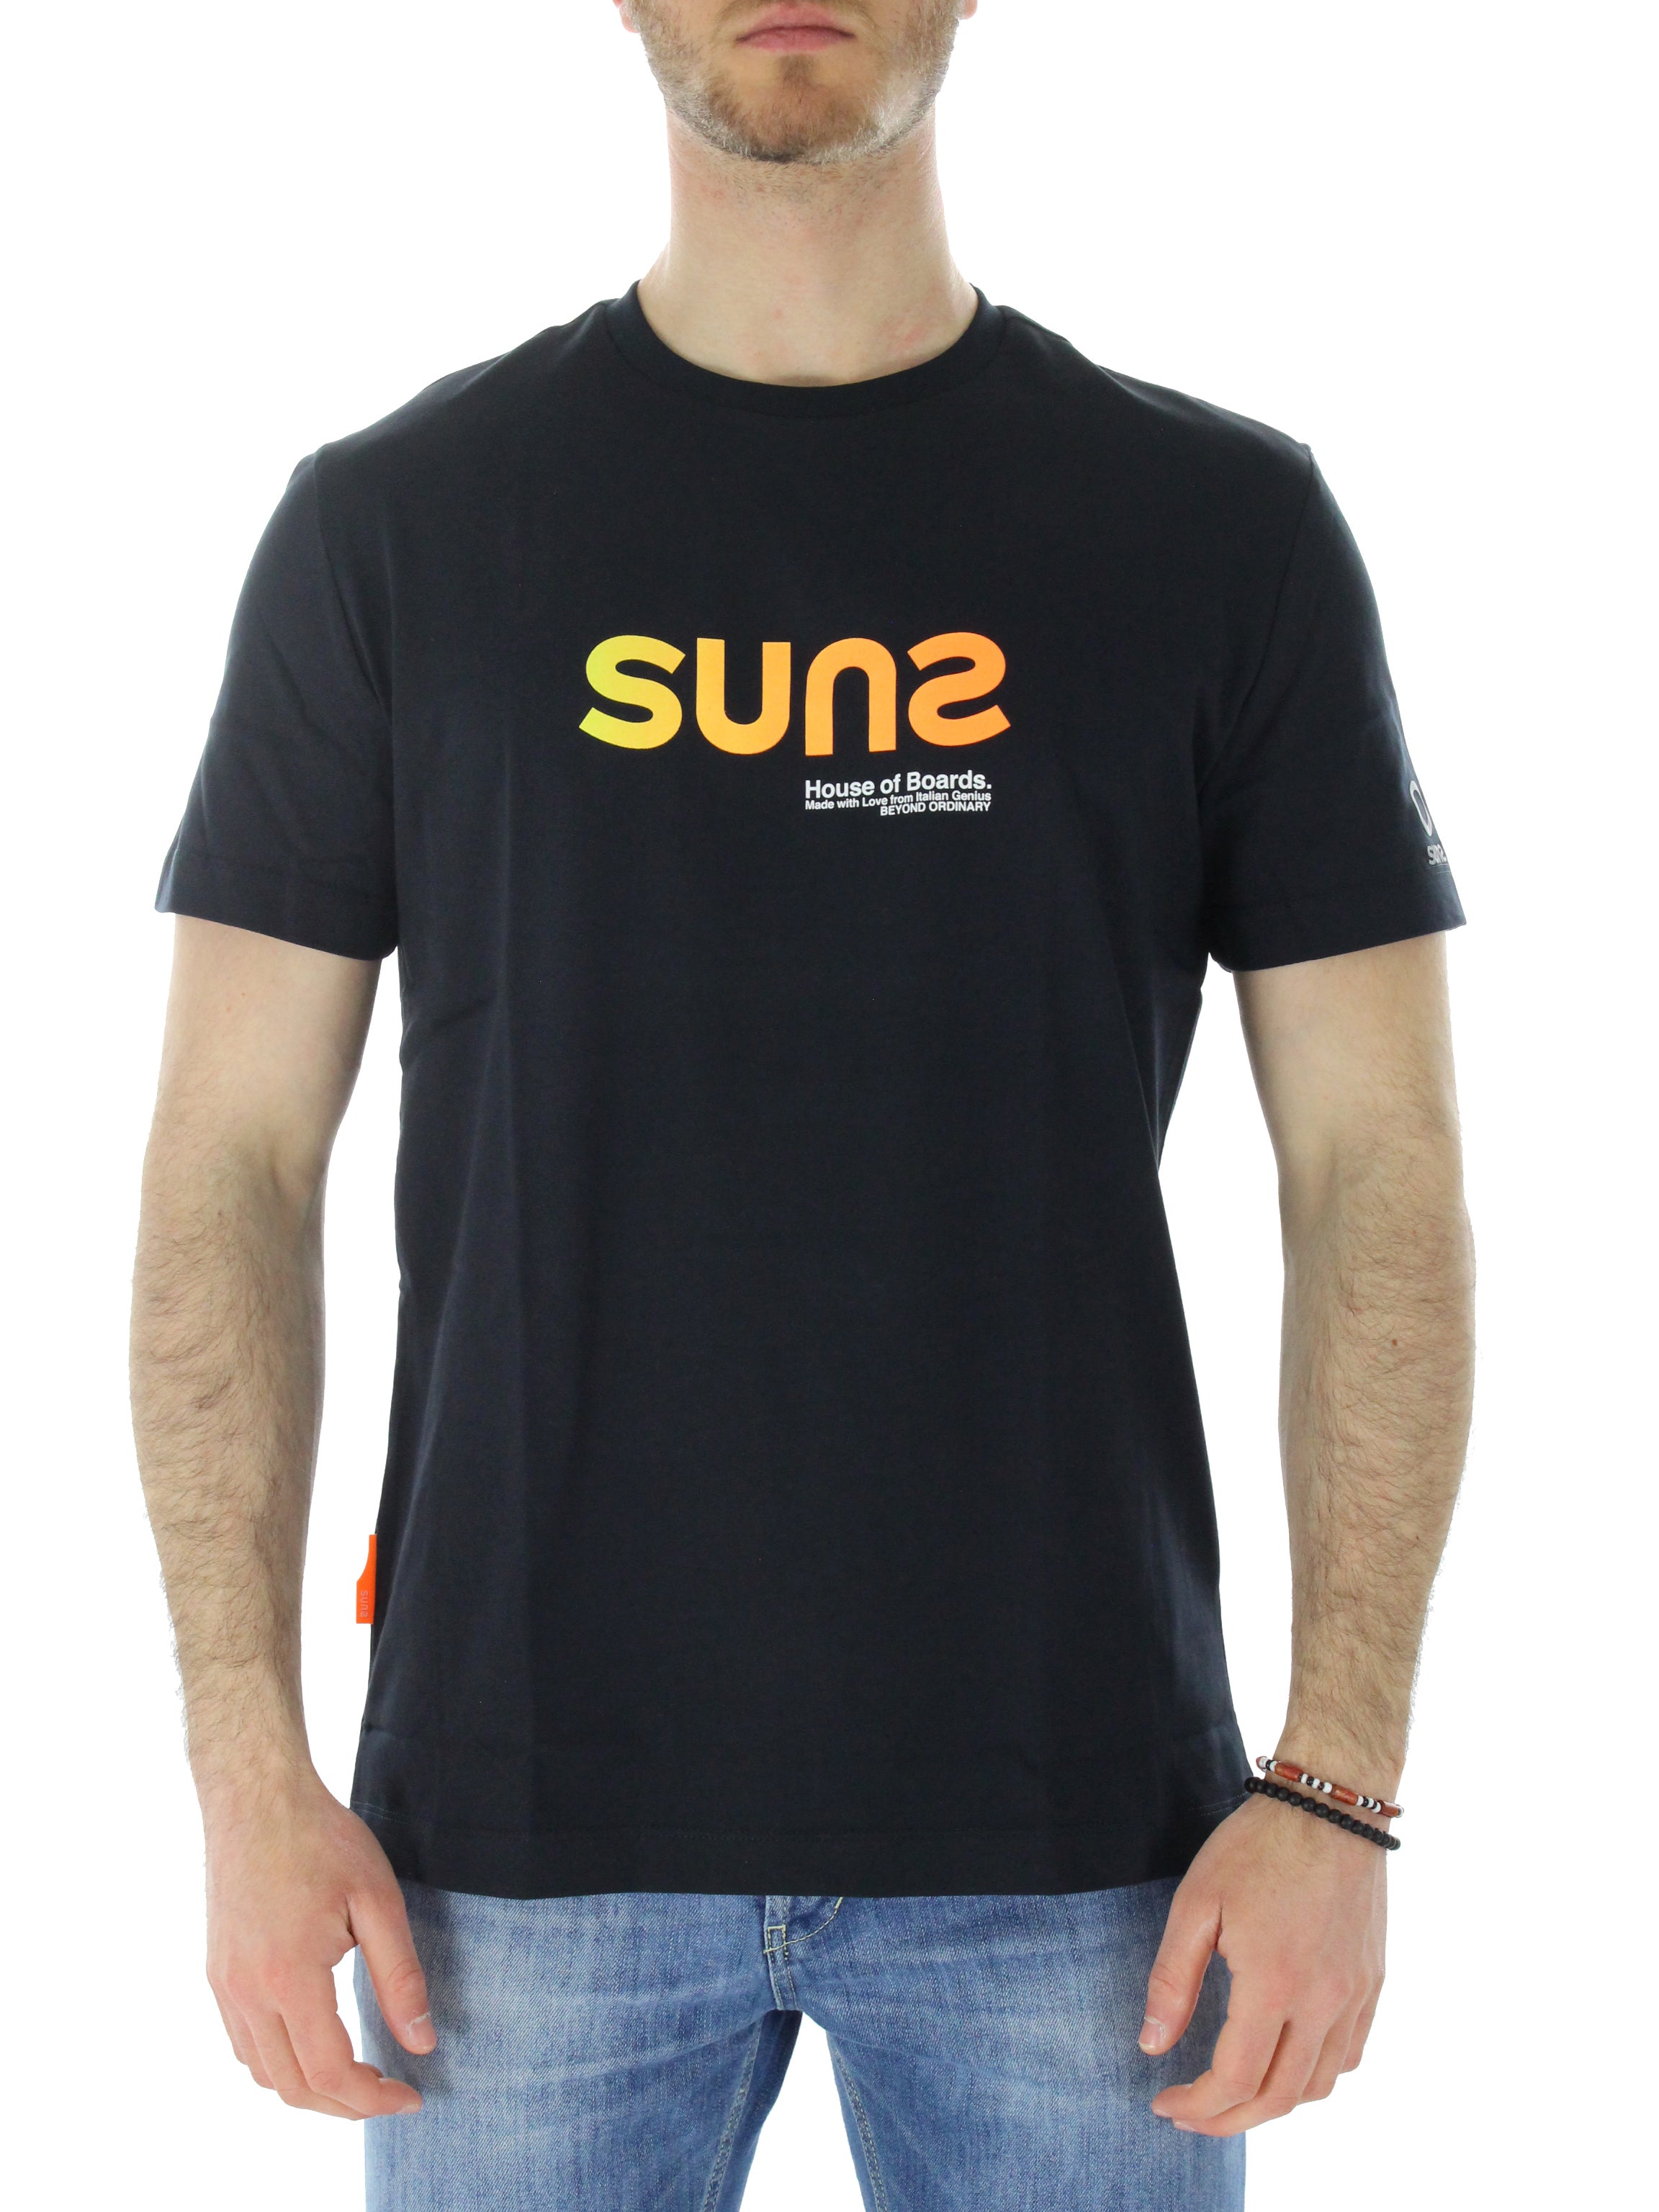 Suns t-shirt paolo br